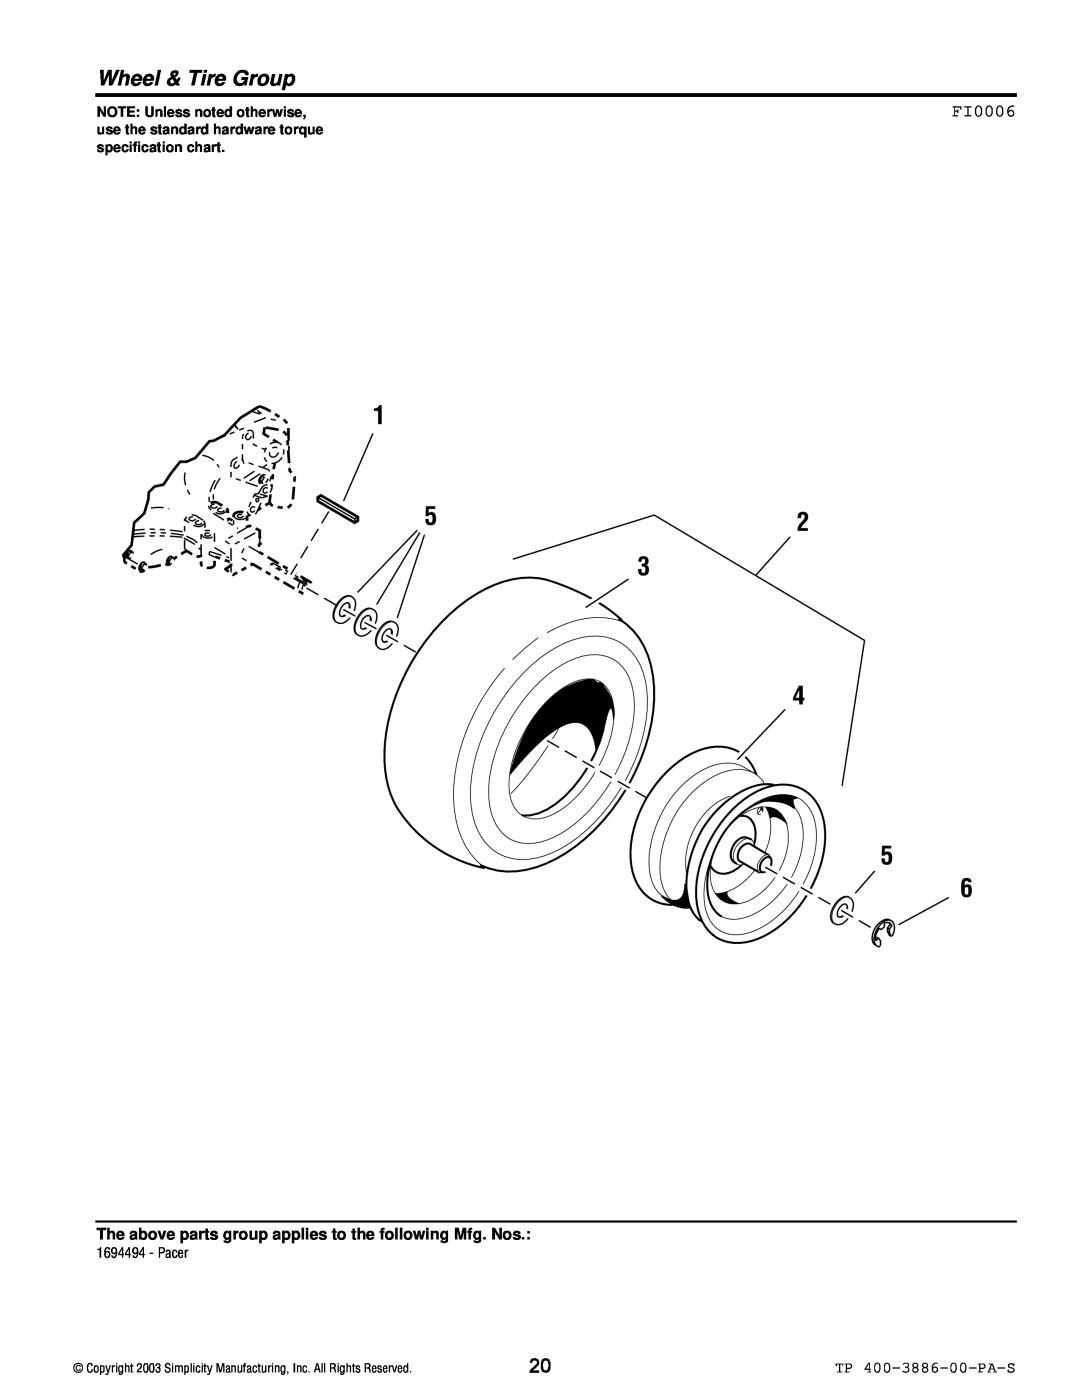 Simplicity Series Transaxle manual Wheel & Tire Group, FI0006, TP 400-3886-00-PA-S, NOTE Unless noted otherwise 